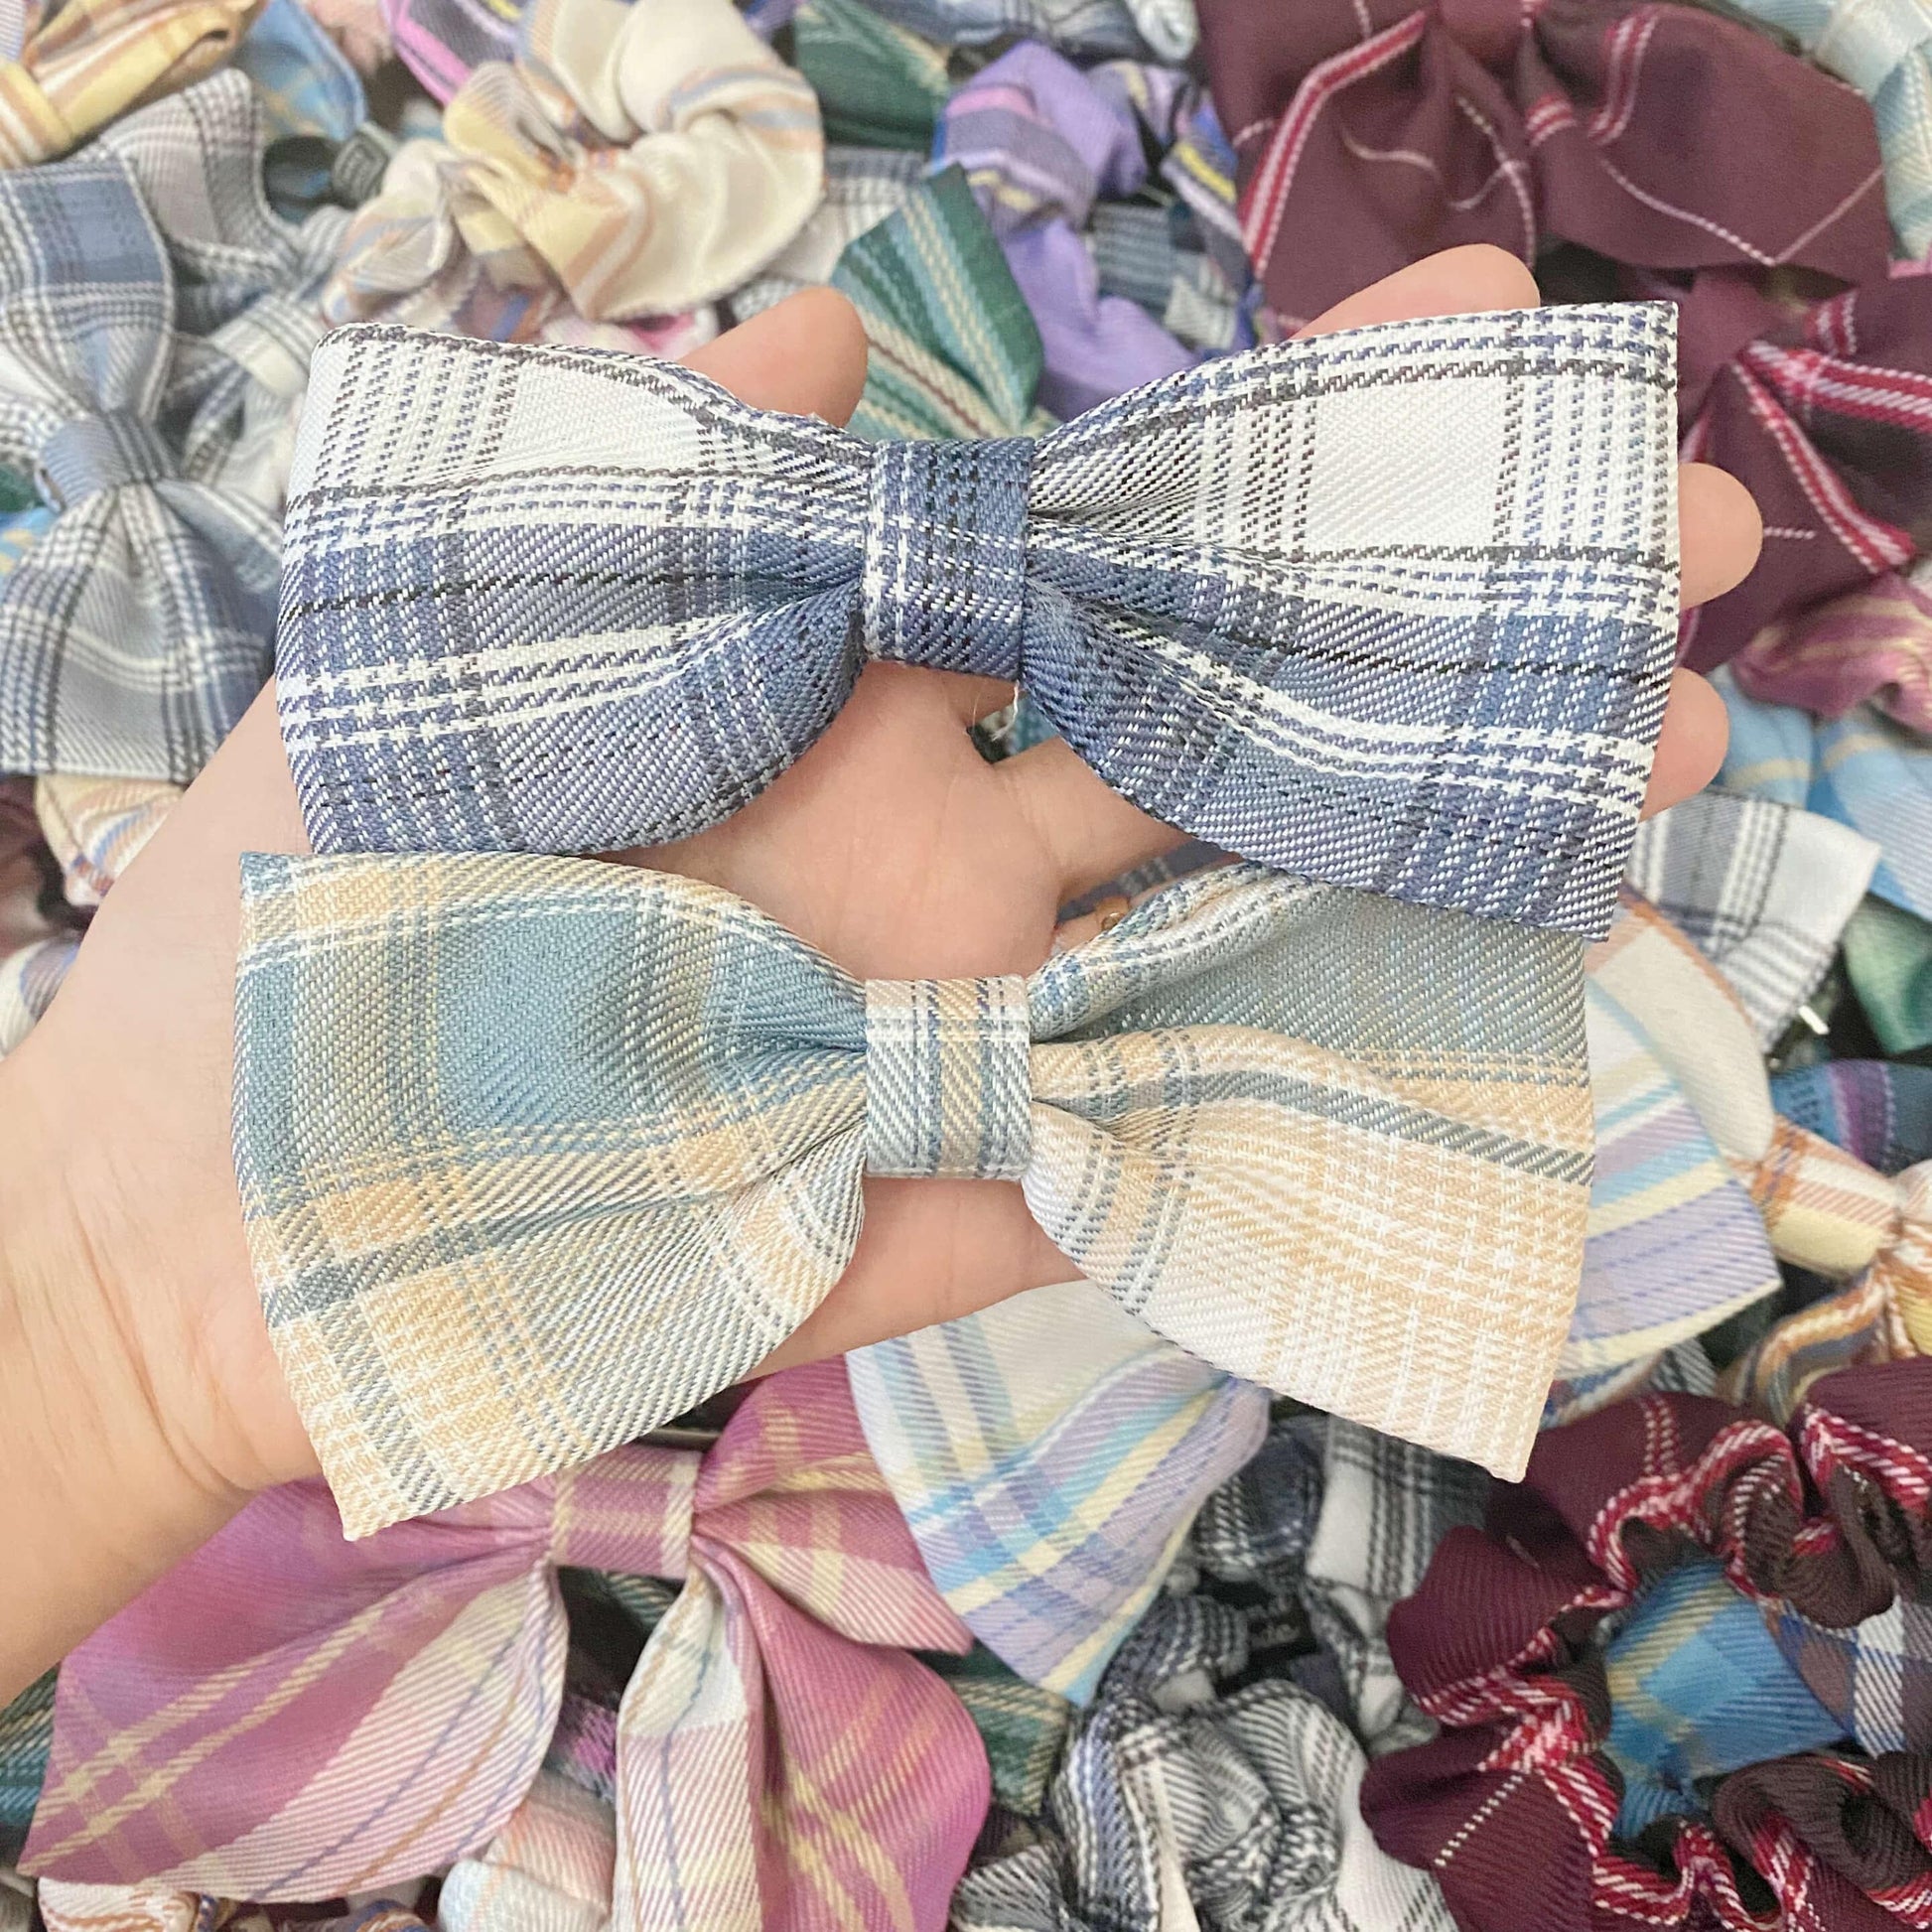 [SCOOPING TIME] 1 Big Scoop of JK Plaid Designs Scrunchies/Hair Bows/Hair Ties/Hair Clips Mix Pack-SURPRISE ELEMENTS NEWLY ADDED! - Belle Rose Nails